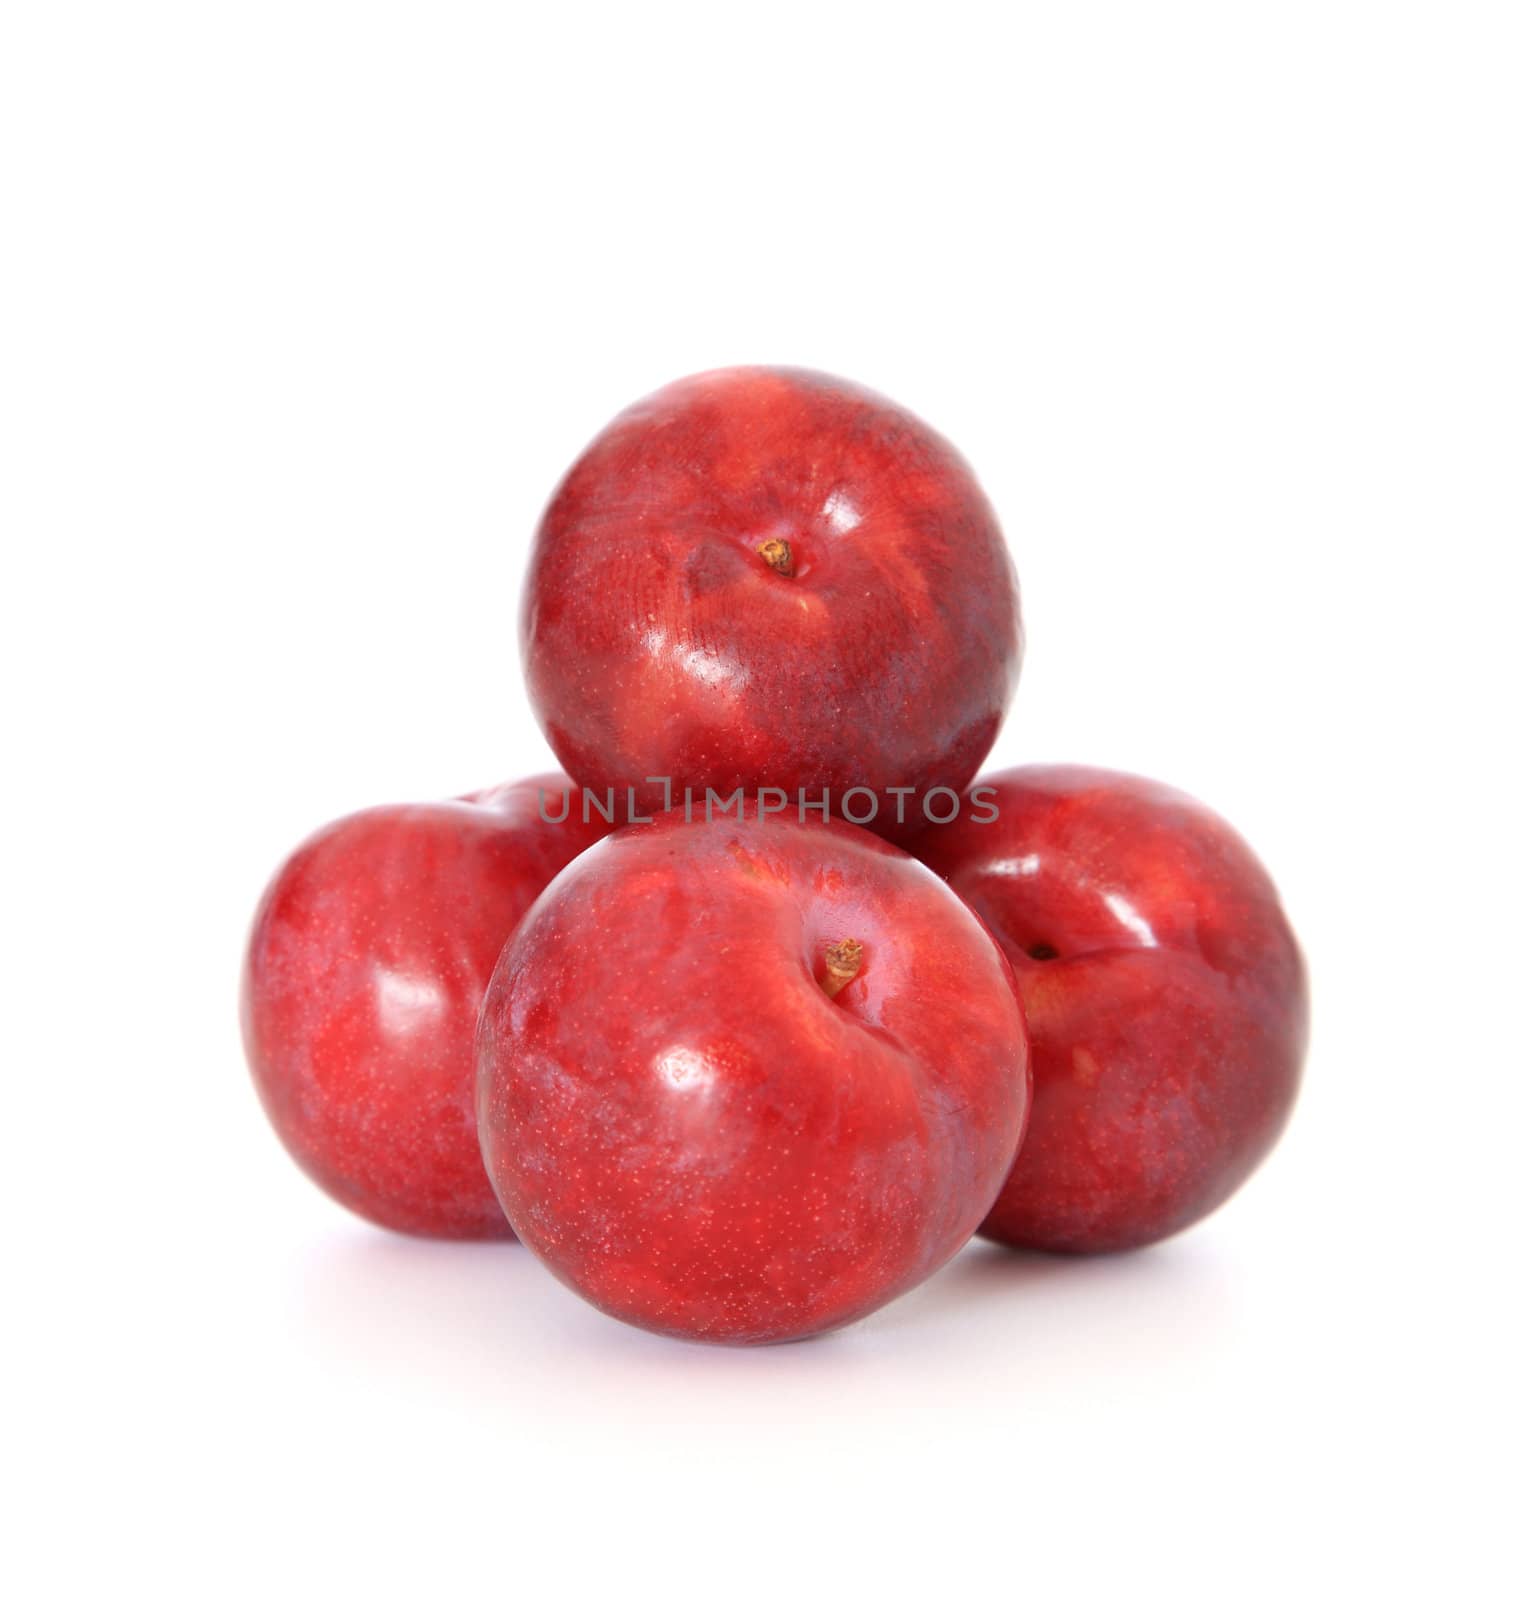 Red apples on white background.